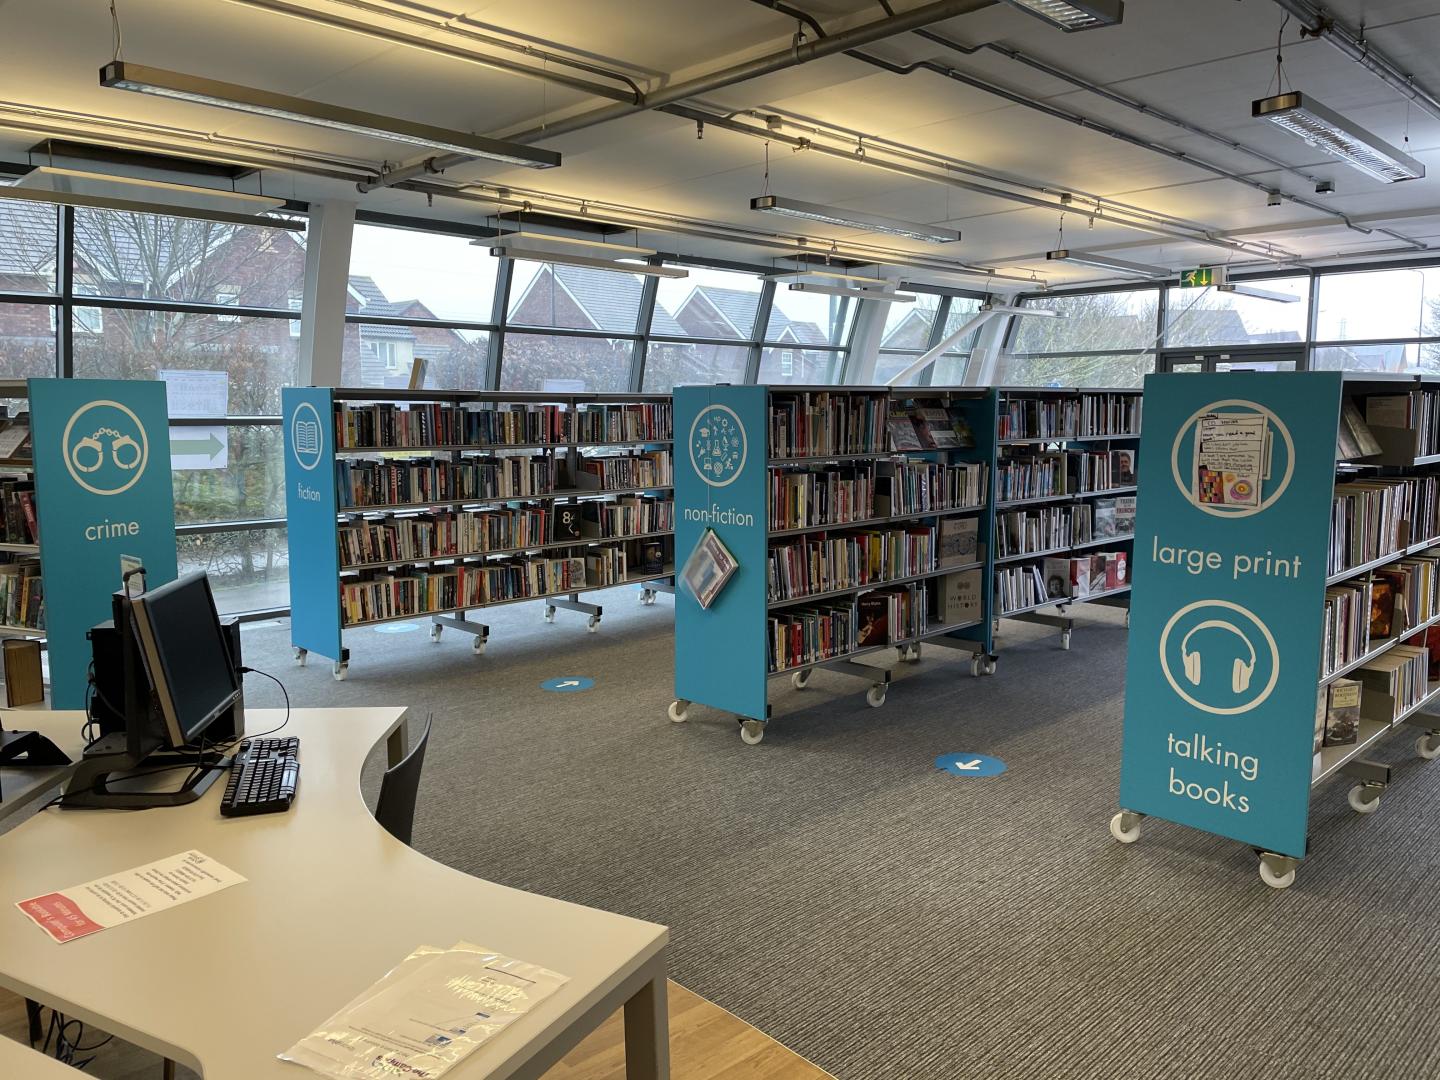 An interior image of the Campus library, with bright blue shelves and books and grey carpet